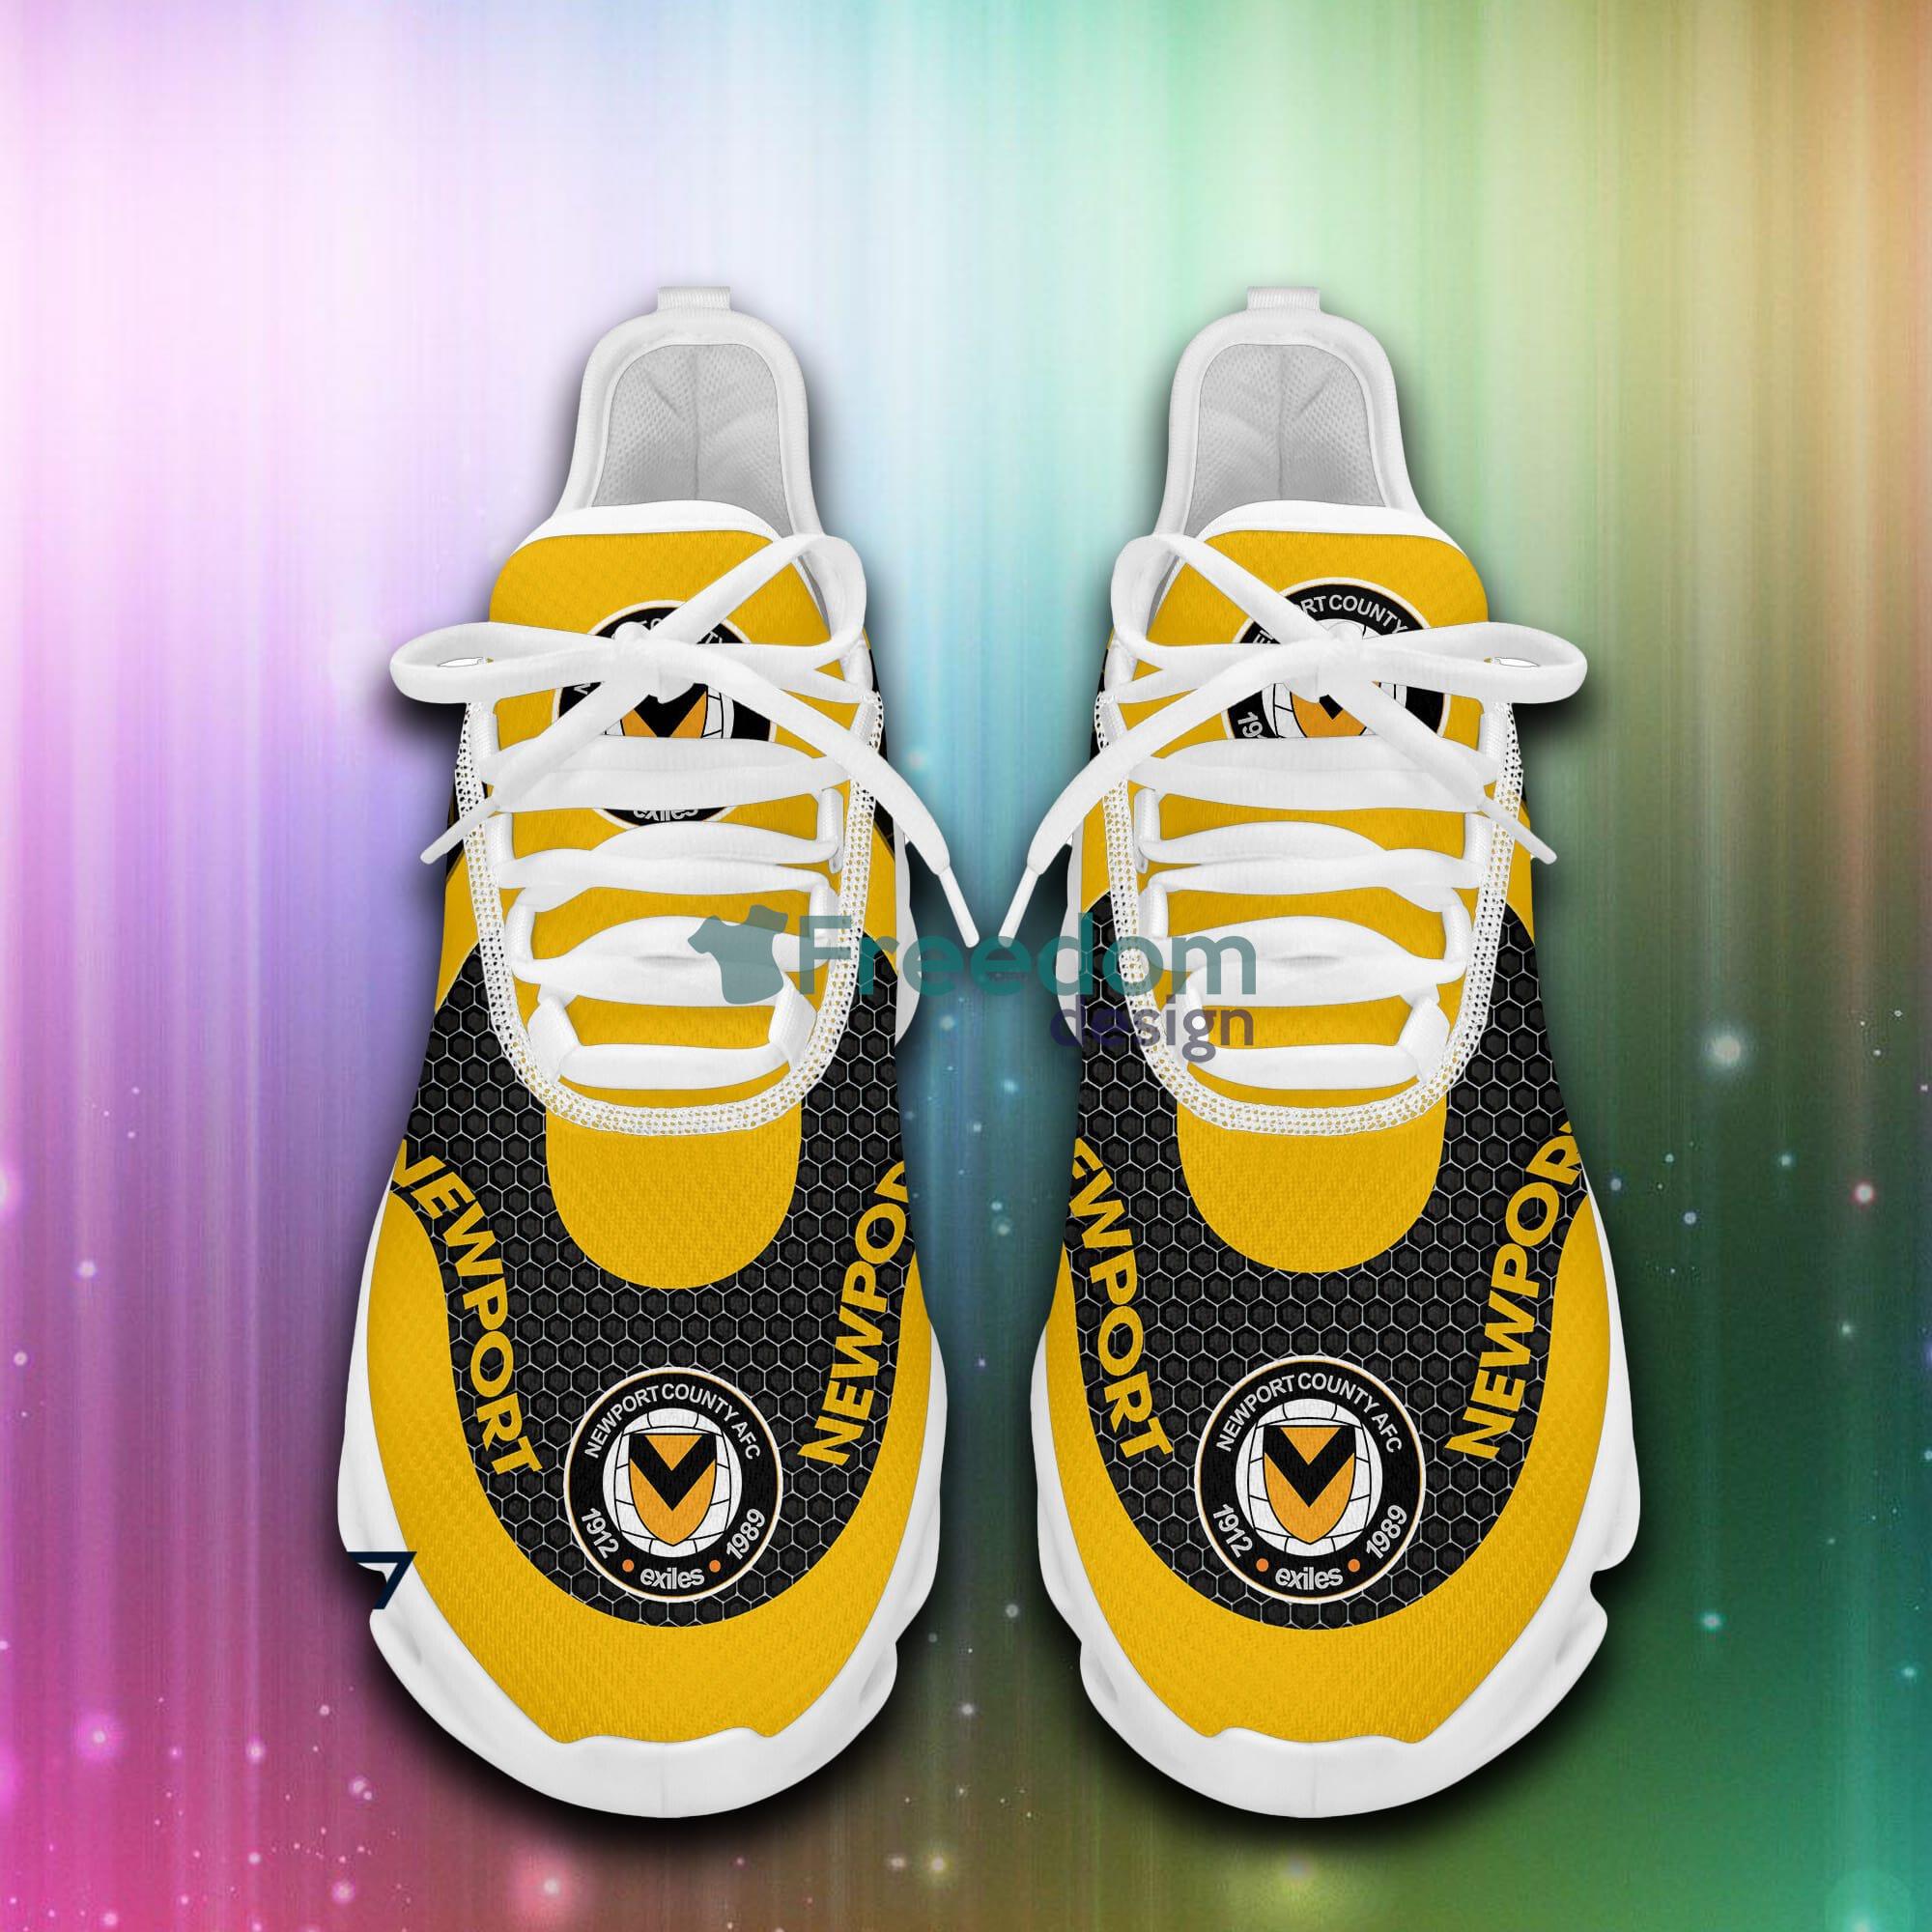 Indsprøjtning Oswald Arbejdsgiver EFL Newport County Sport Shoes Max Sneakers Men And Women For Fans Gift -  Freedomdesign